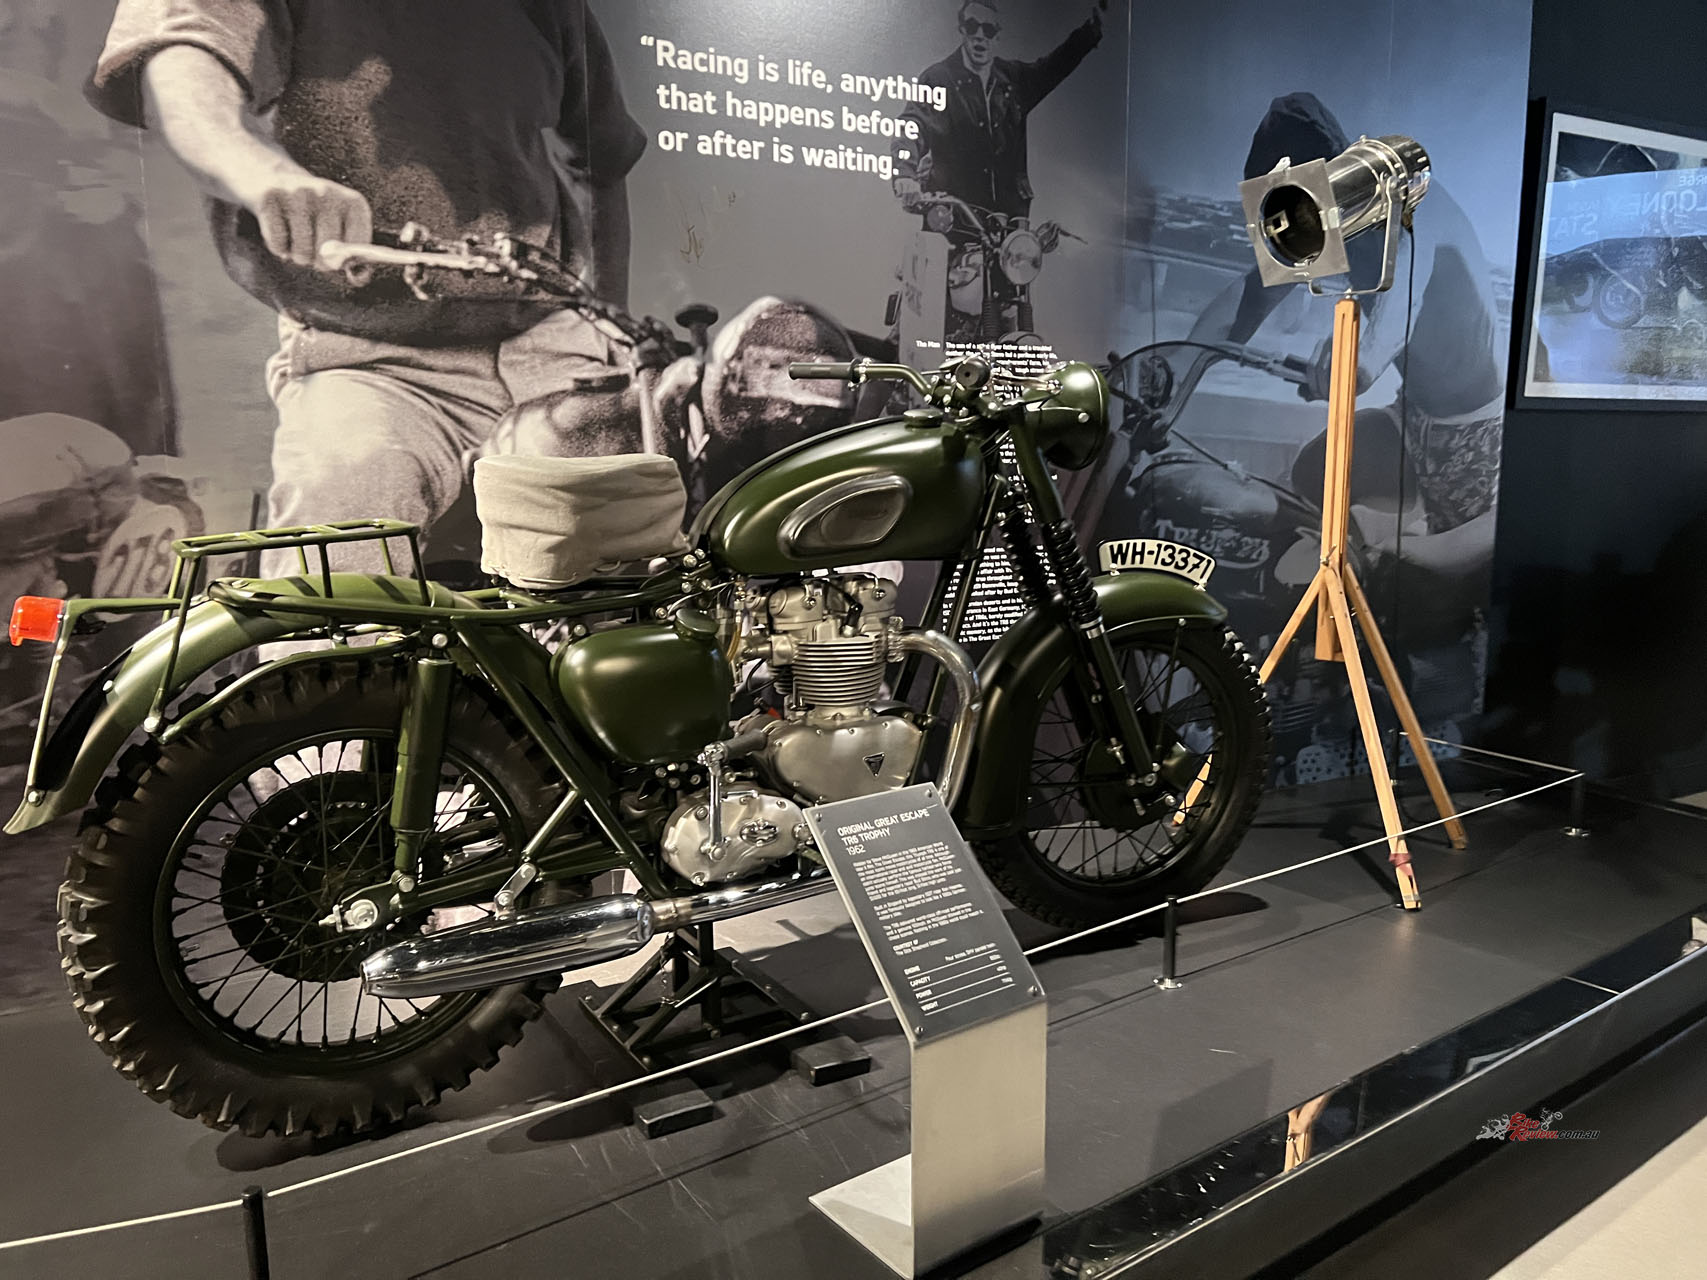 In pristine condition is the original Great Escape TR6 Trophy sitting on display. It's hard to think of a Triumph more iconic than this, let alone a motorcycle that multiple generations of people can identify.